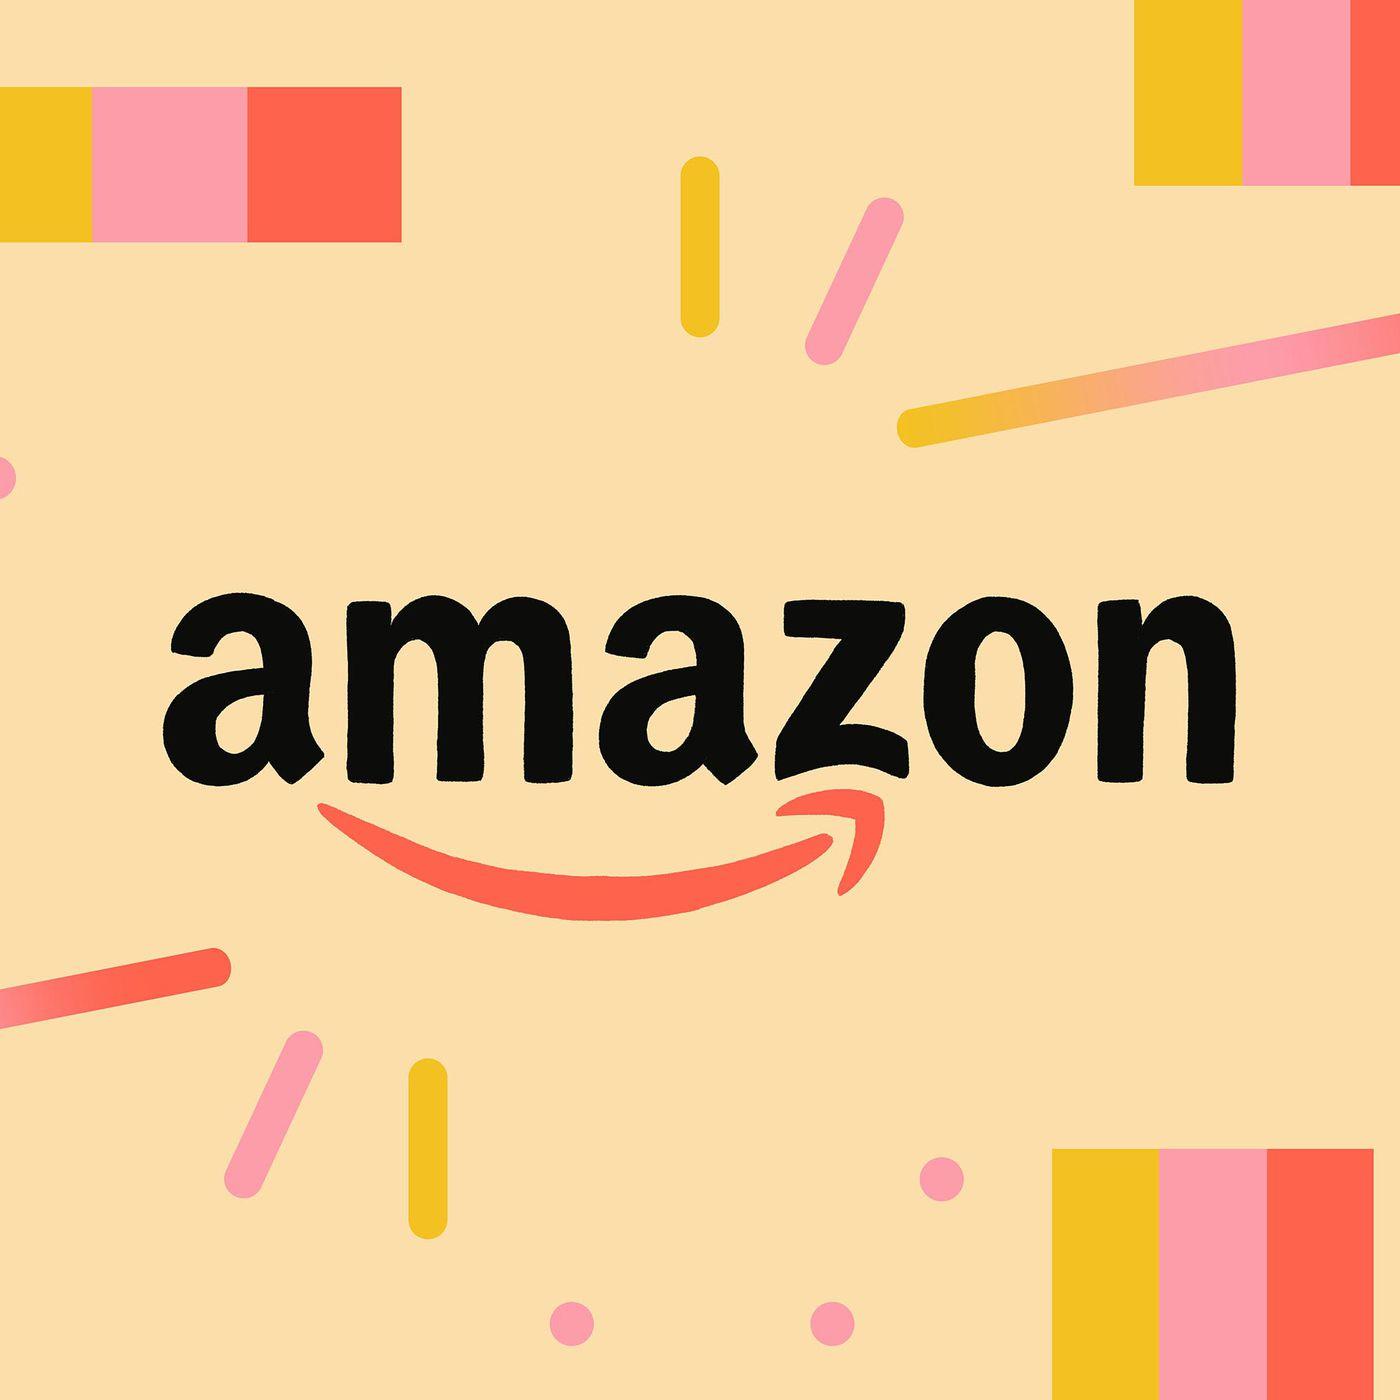 Amazon Music Logo - Amazon Prime Day 2019: When does it start and end? - Curbed